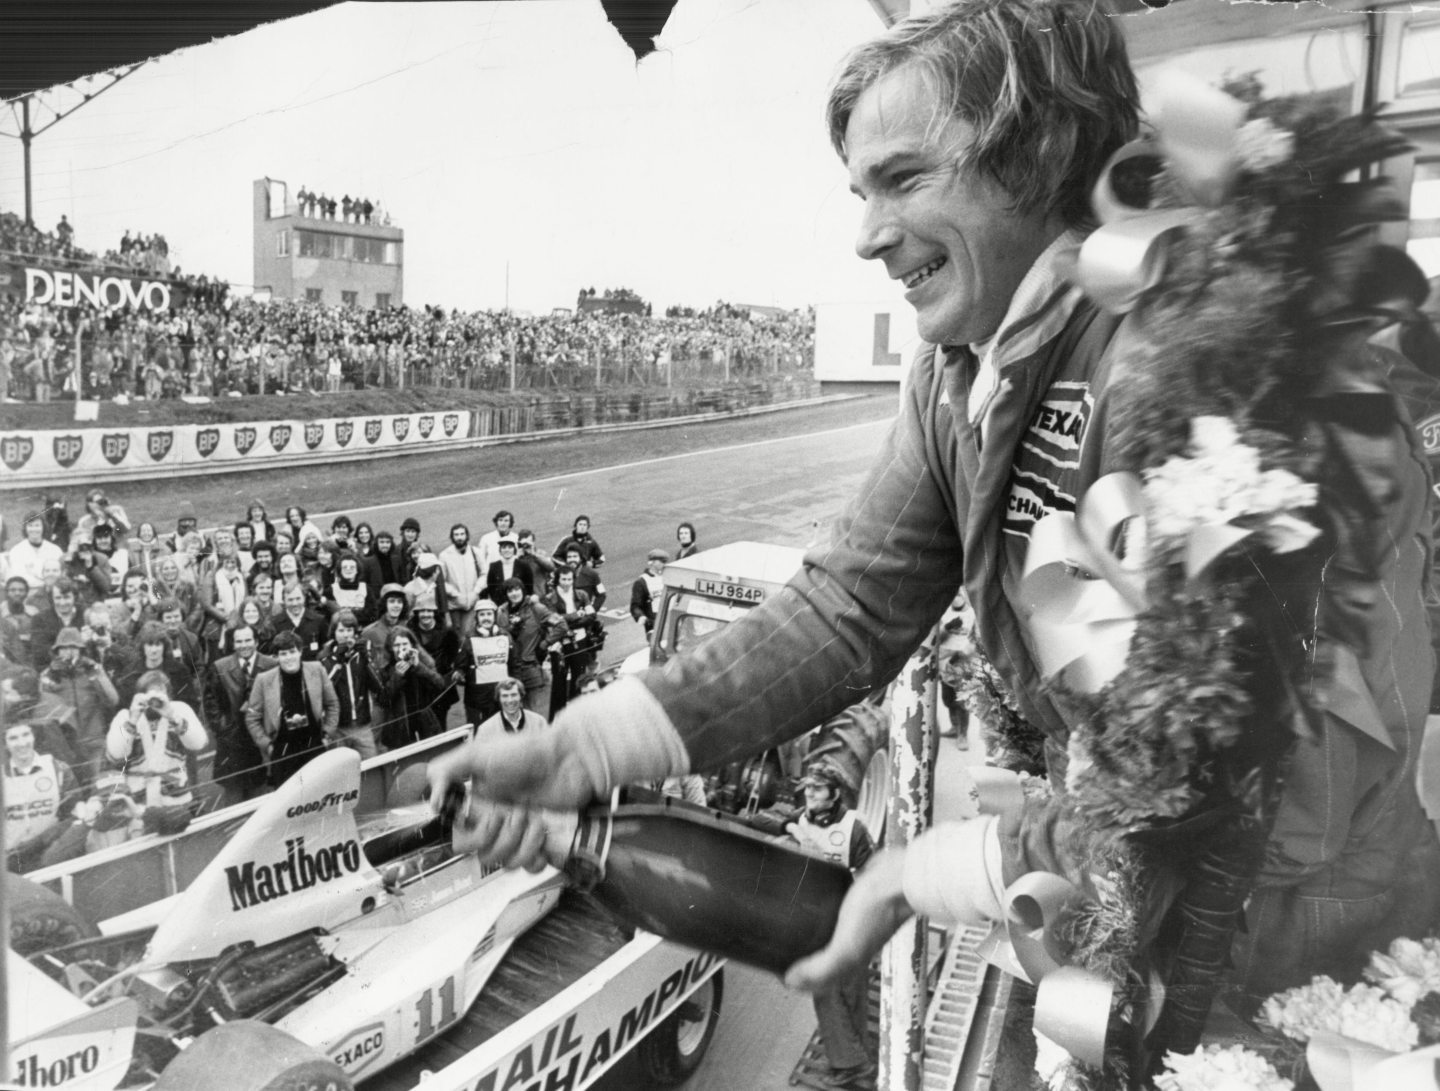 James Hunt opening a bottle of champagne on the podium